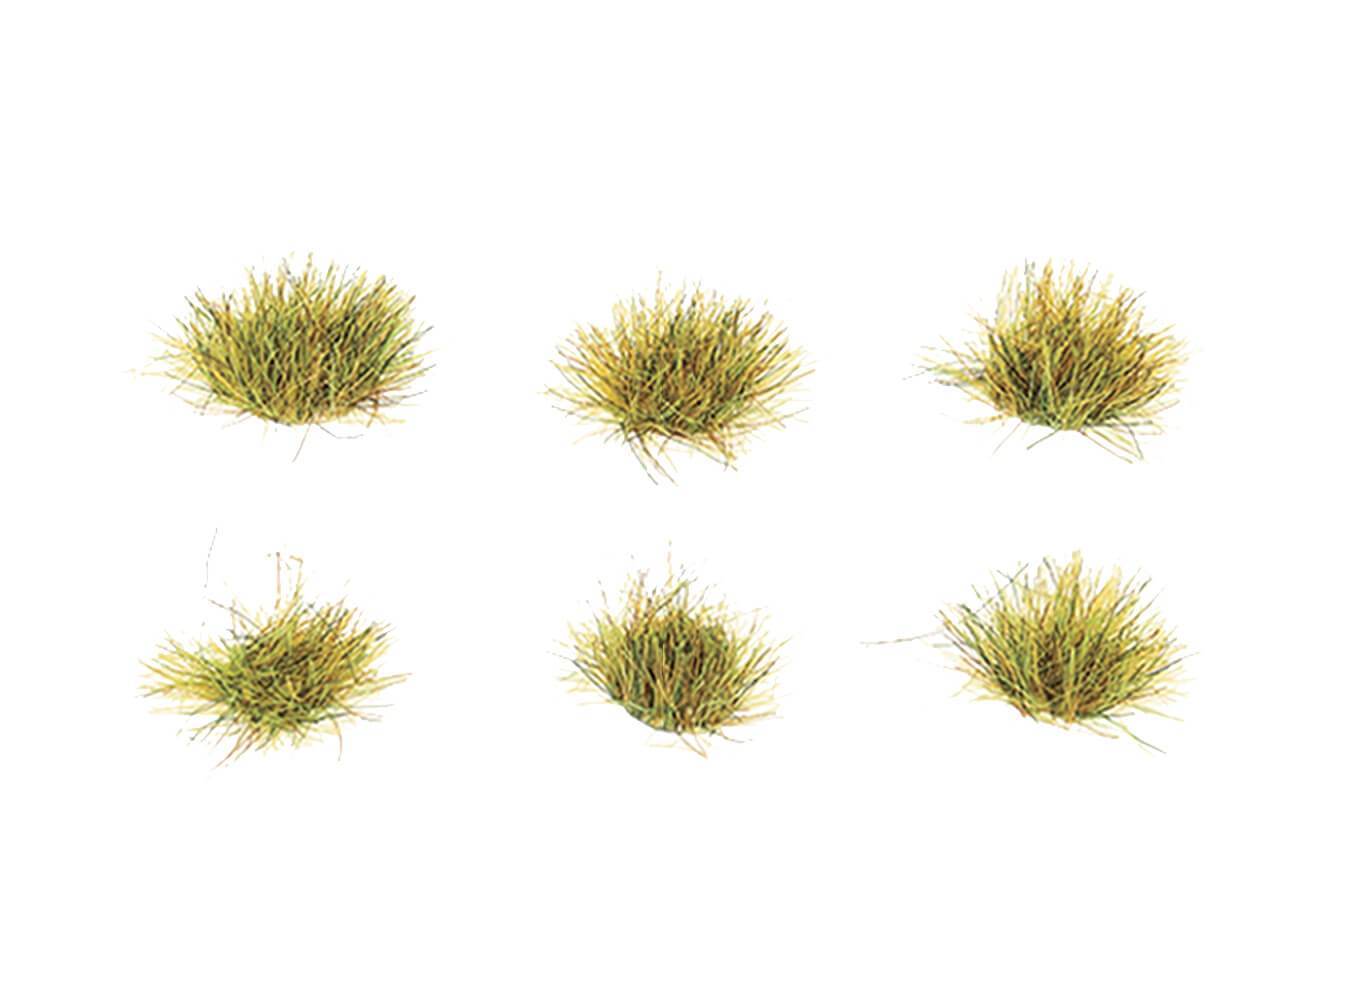 Peco PSG-64 6mm Self Adhesive Spring Grass Tufts (Pack of 100)